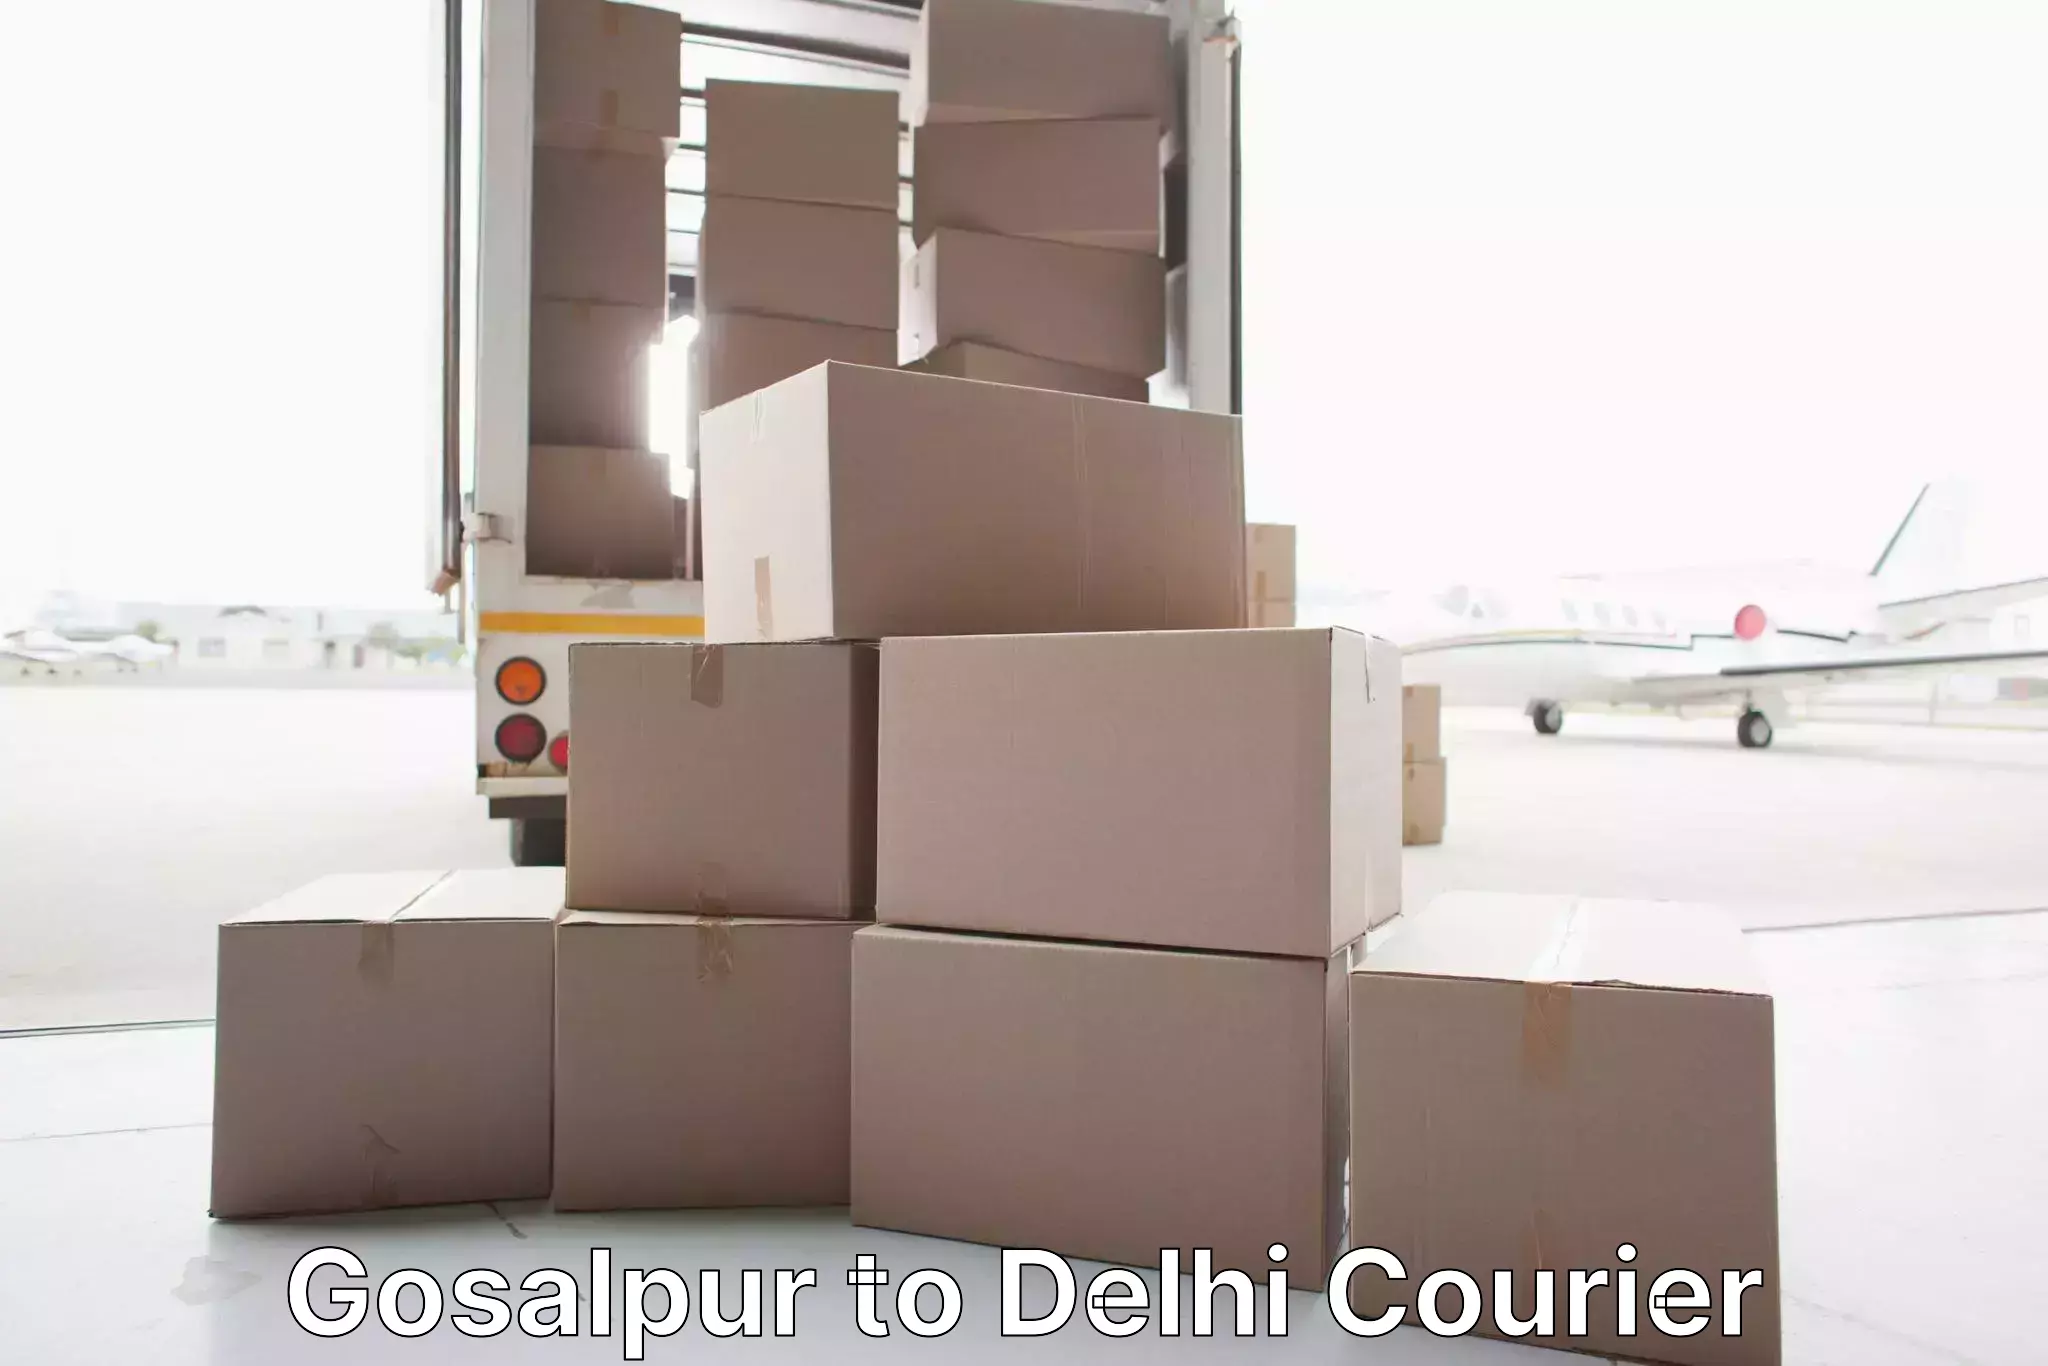 Furniture moving solutions Gosalpur to NCR